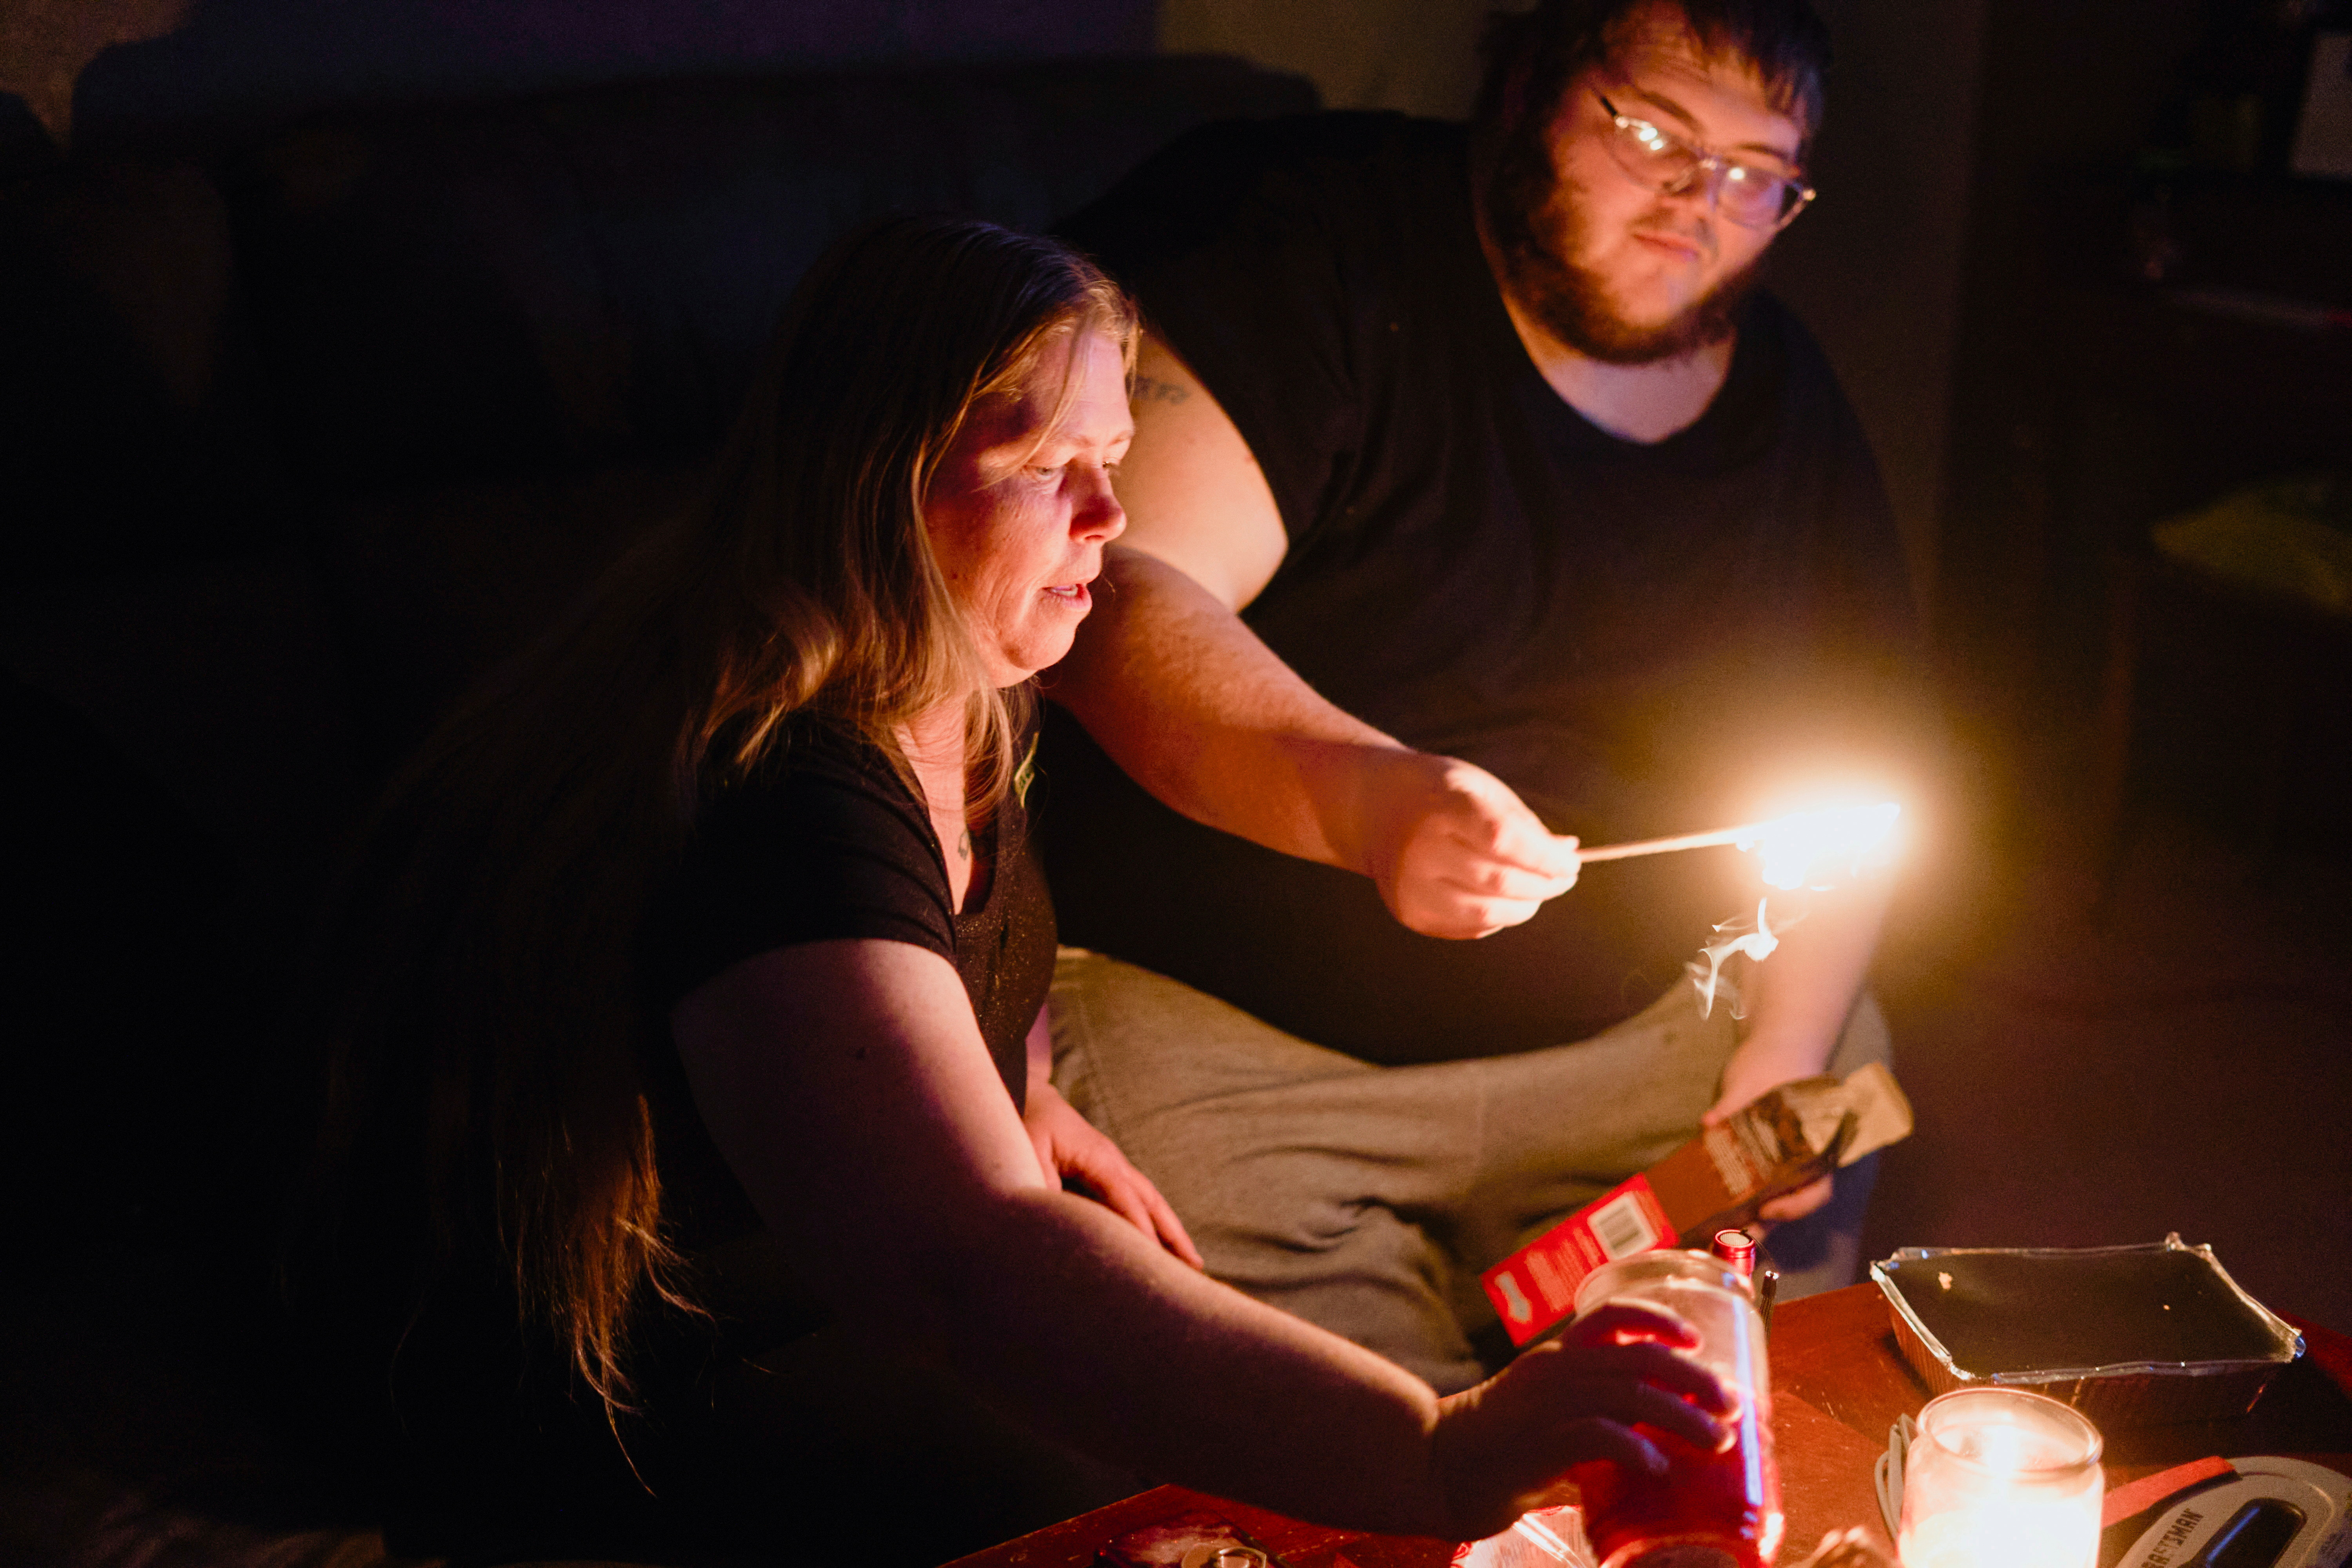 Christina Beverly and John Shearon light candles in their home after winter weather caused electricity blackouts and "boil water" notices in Fort Worth, Texas, U.S. February 20, 2021. Their home has not had power since blackouts began across the state on Sunday, February 14, 2021, according to the residents. REUTERS/Cooper Neill